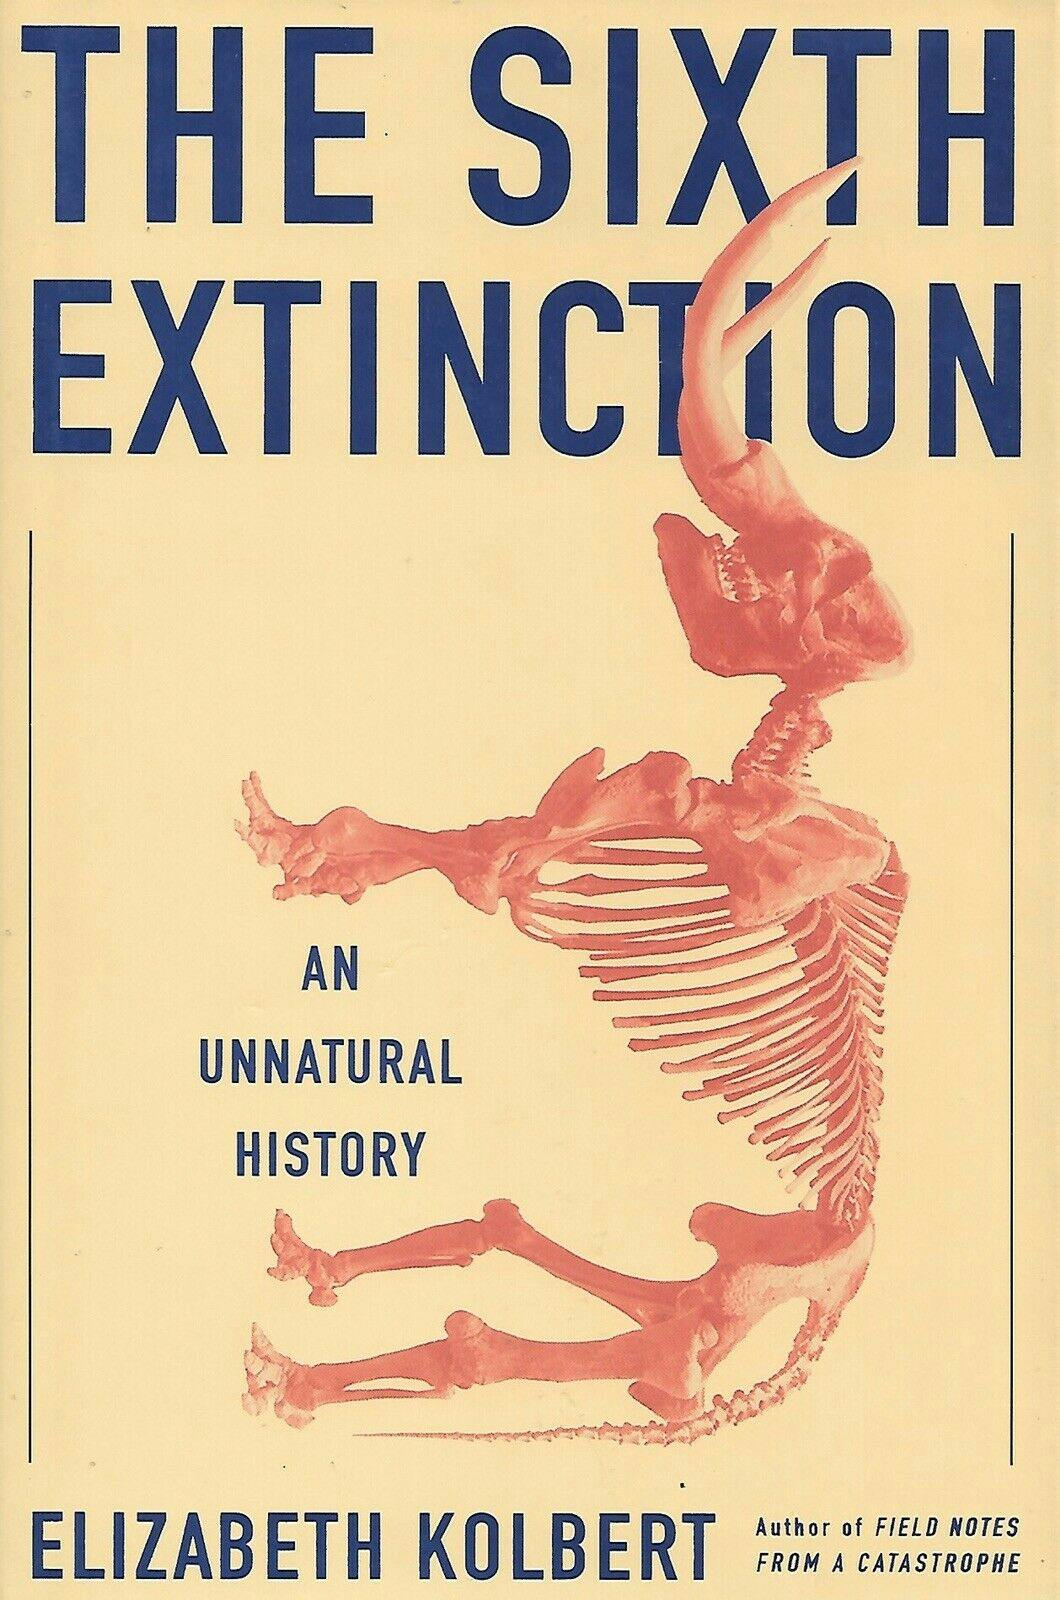 The media cover for “The Sixth Extinction” by Elizabeth Kolbert